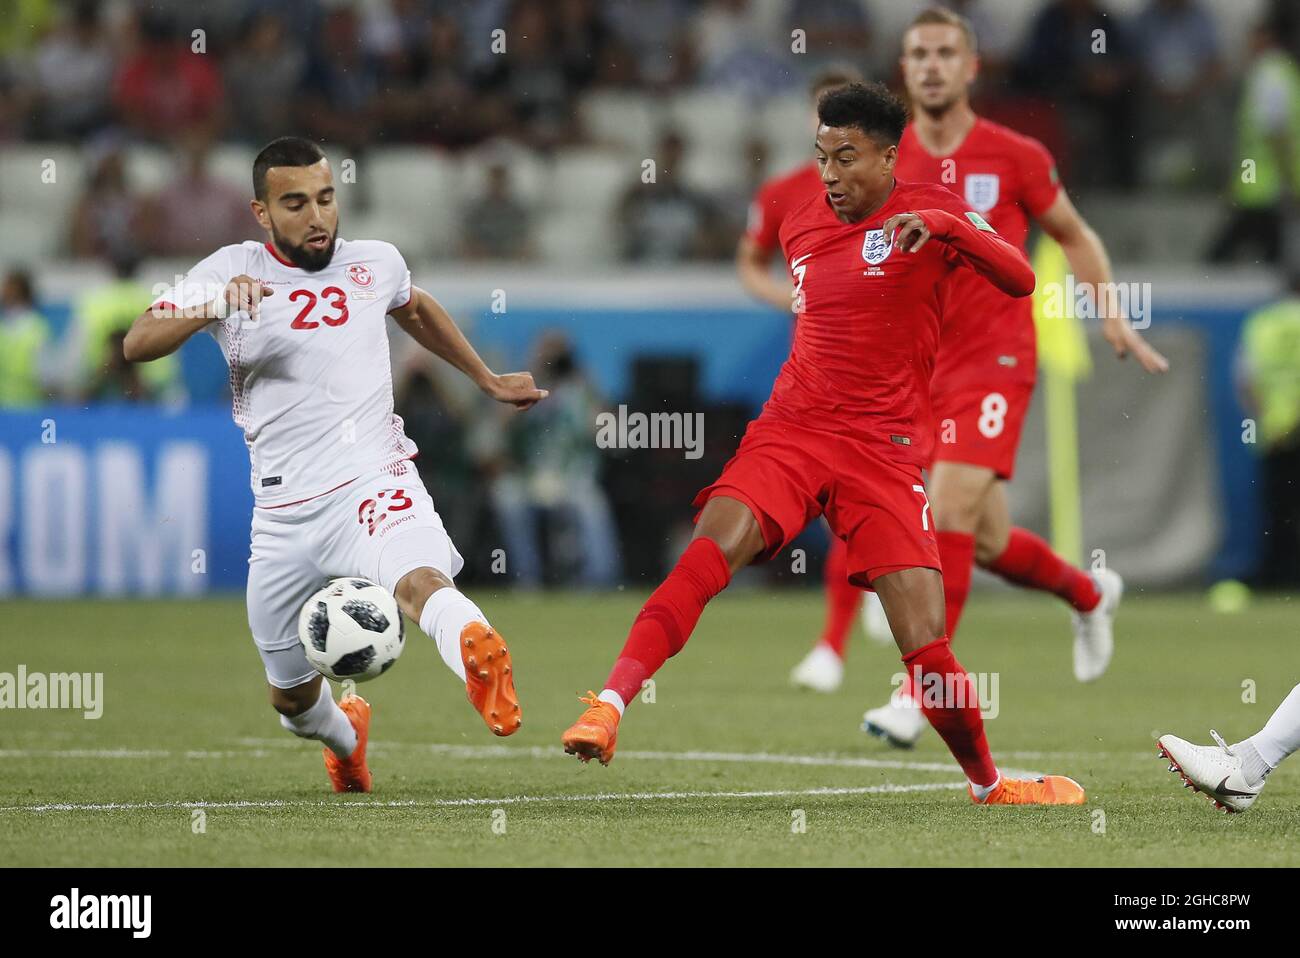 Naim Sliti of Tunisia and Jesse Lingard of England during the FIFA World Cup 2018 Group G match at the Volgograd Arena, Volgograd. Picture date 18th June 2018. Picture credit should read: David Klein/Sportimage via PA Images Stock Photo